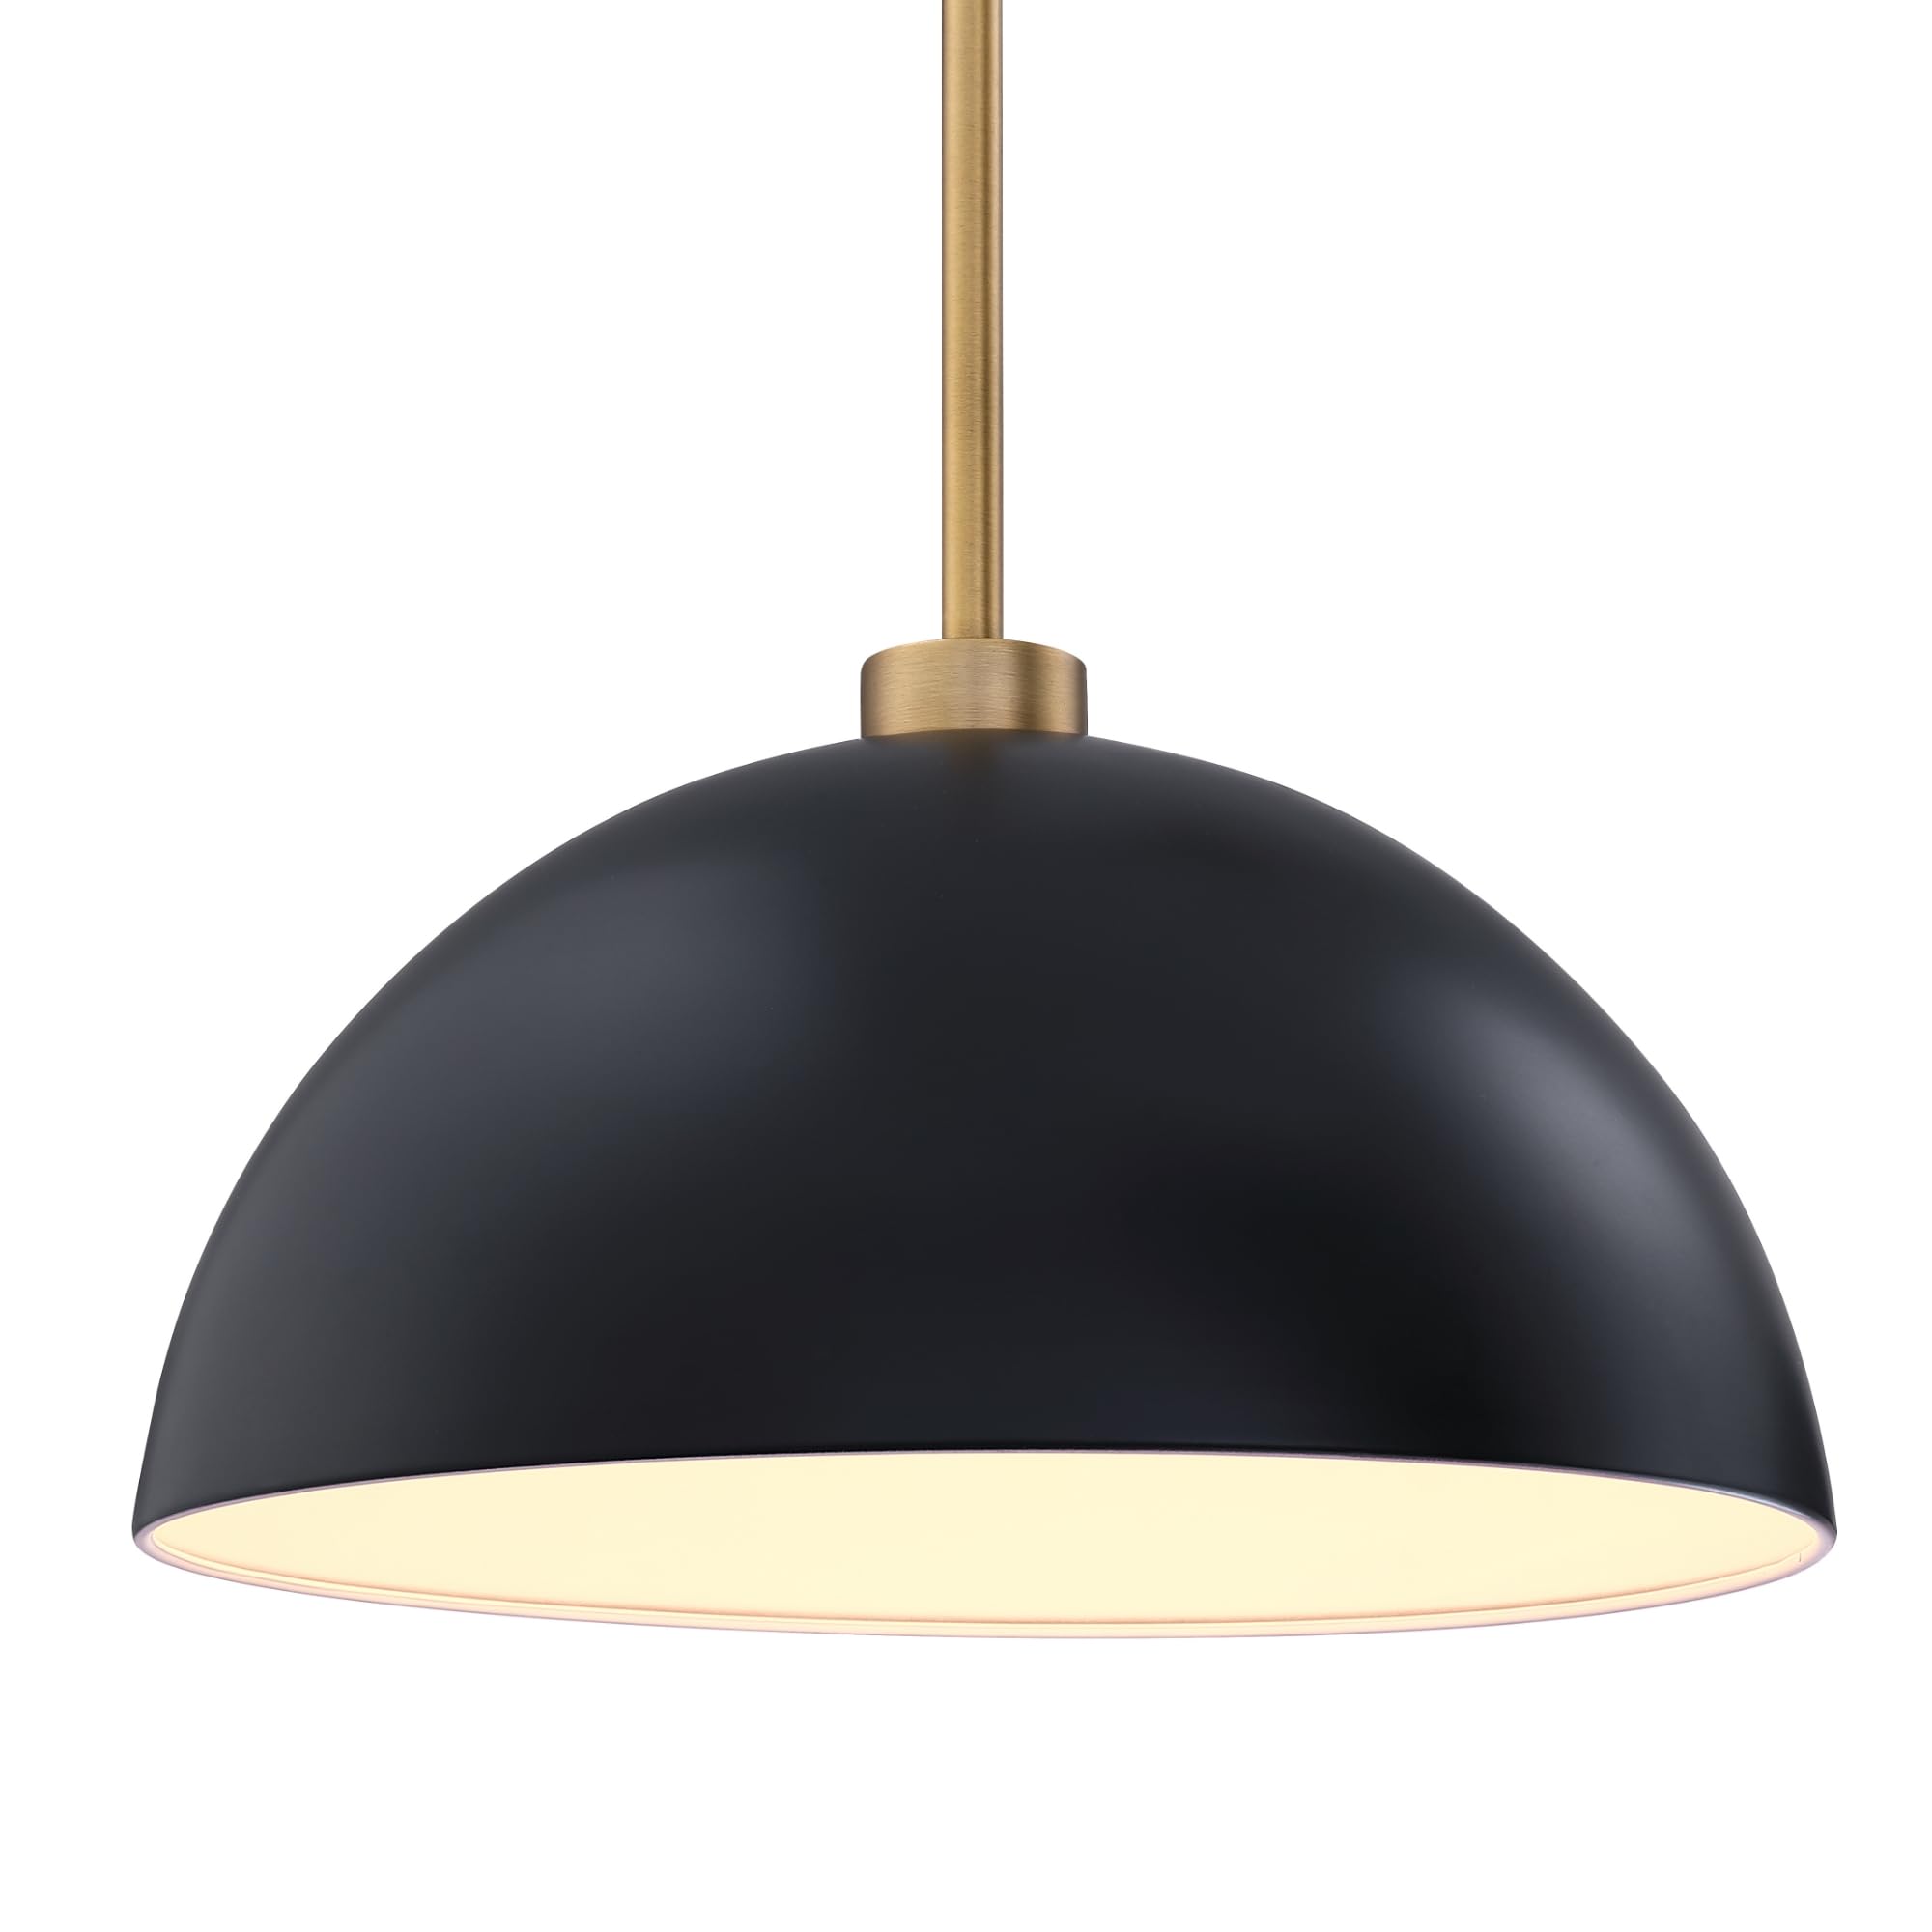 Nathan James Percy Modern 2-Light Pendant Island Light Fixture, Hanging Lights with Metal Shade and Adjustable Cord, for Kitchen, Living Room, Black/Vintage Brass